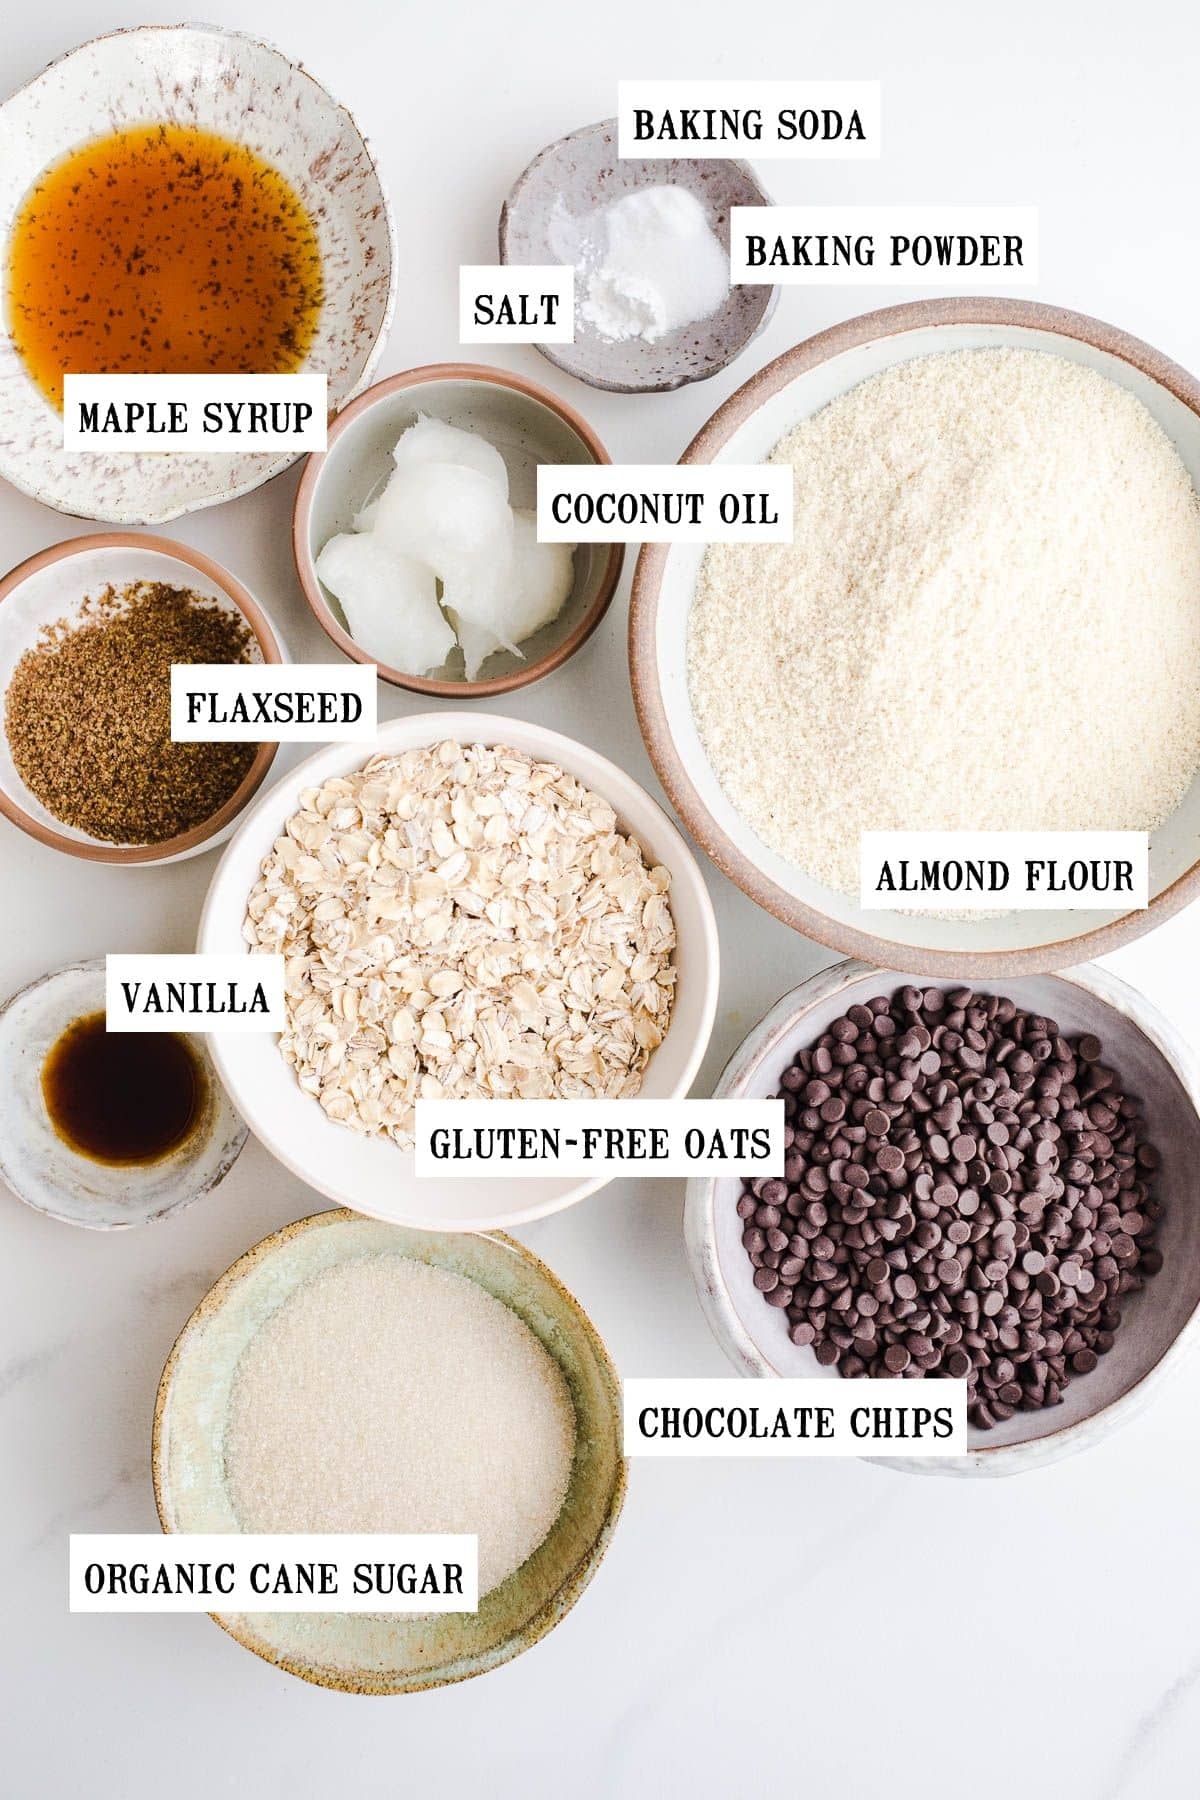 Ingredients to make gluten-free cookies in small bowls.